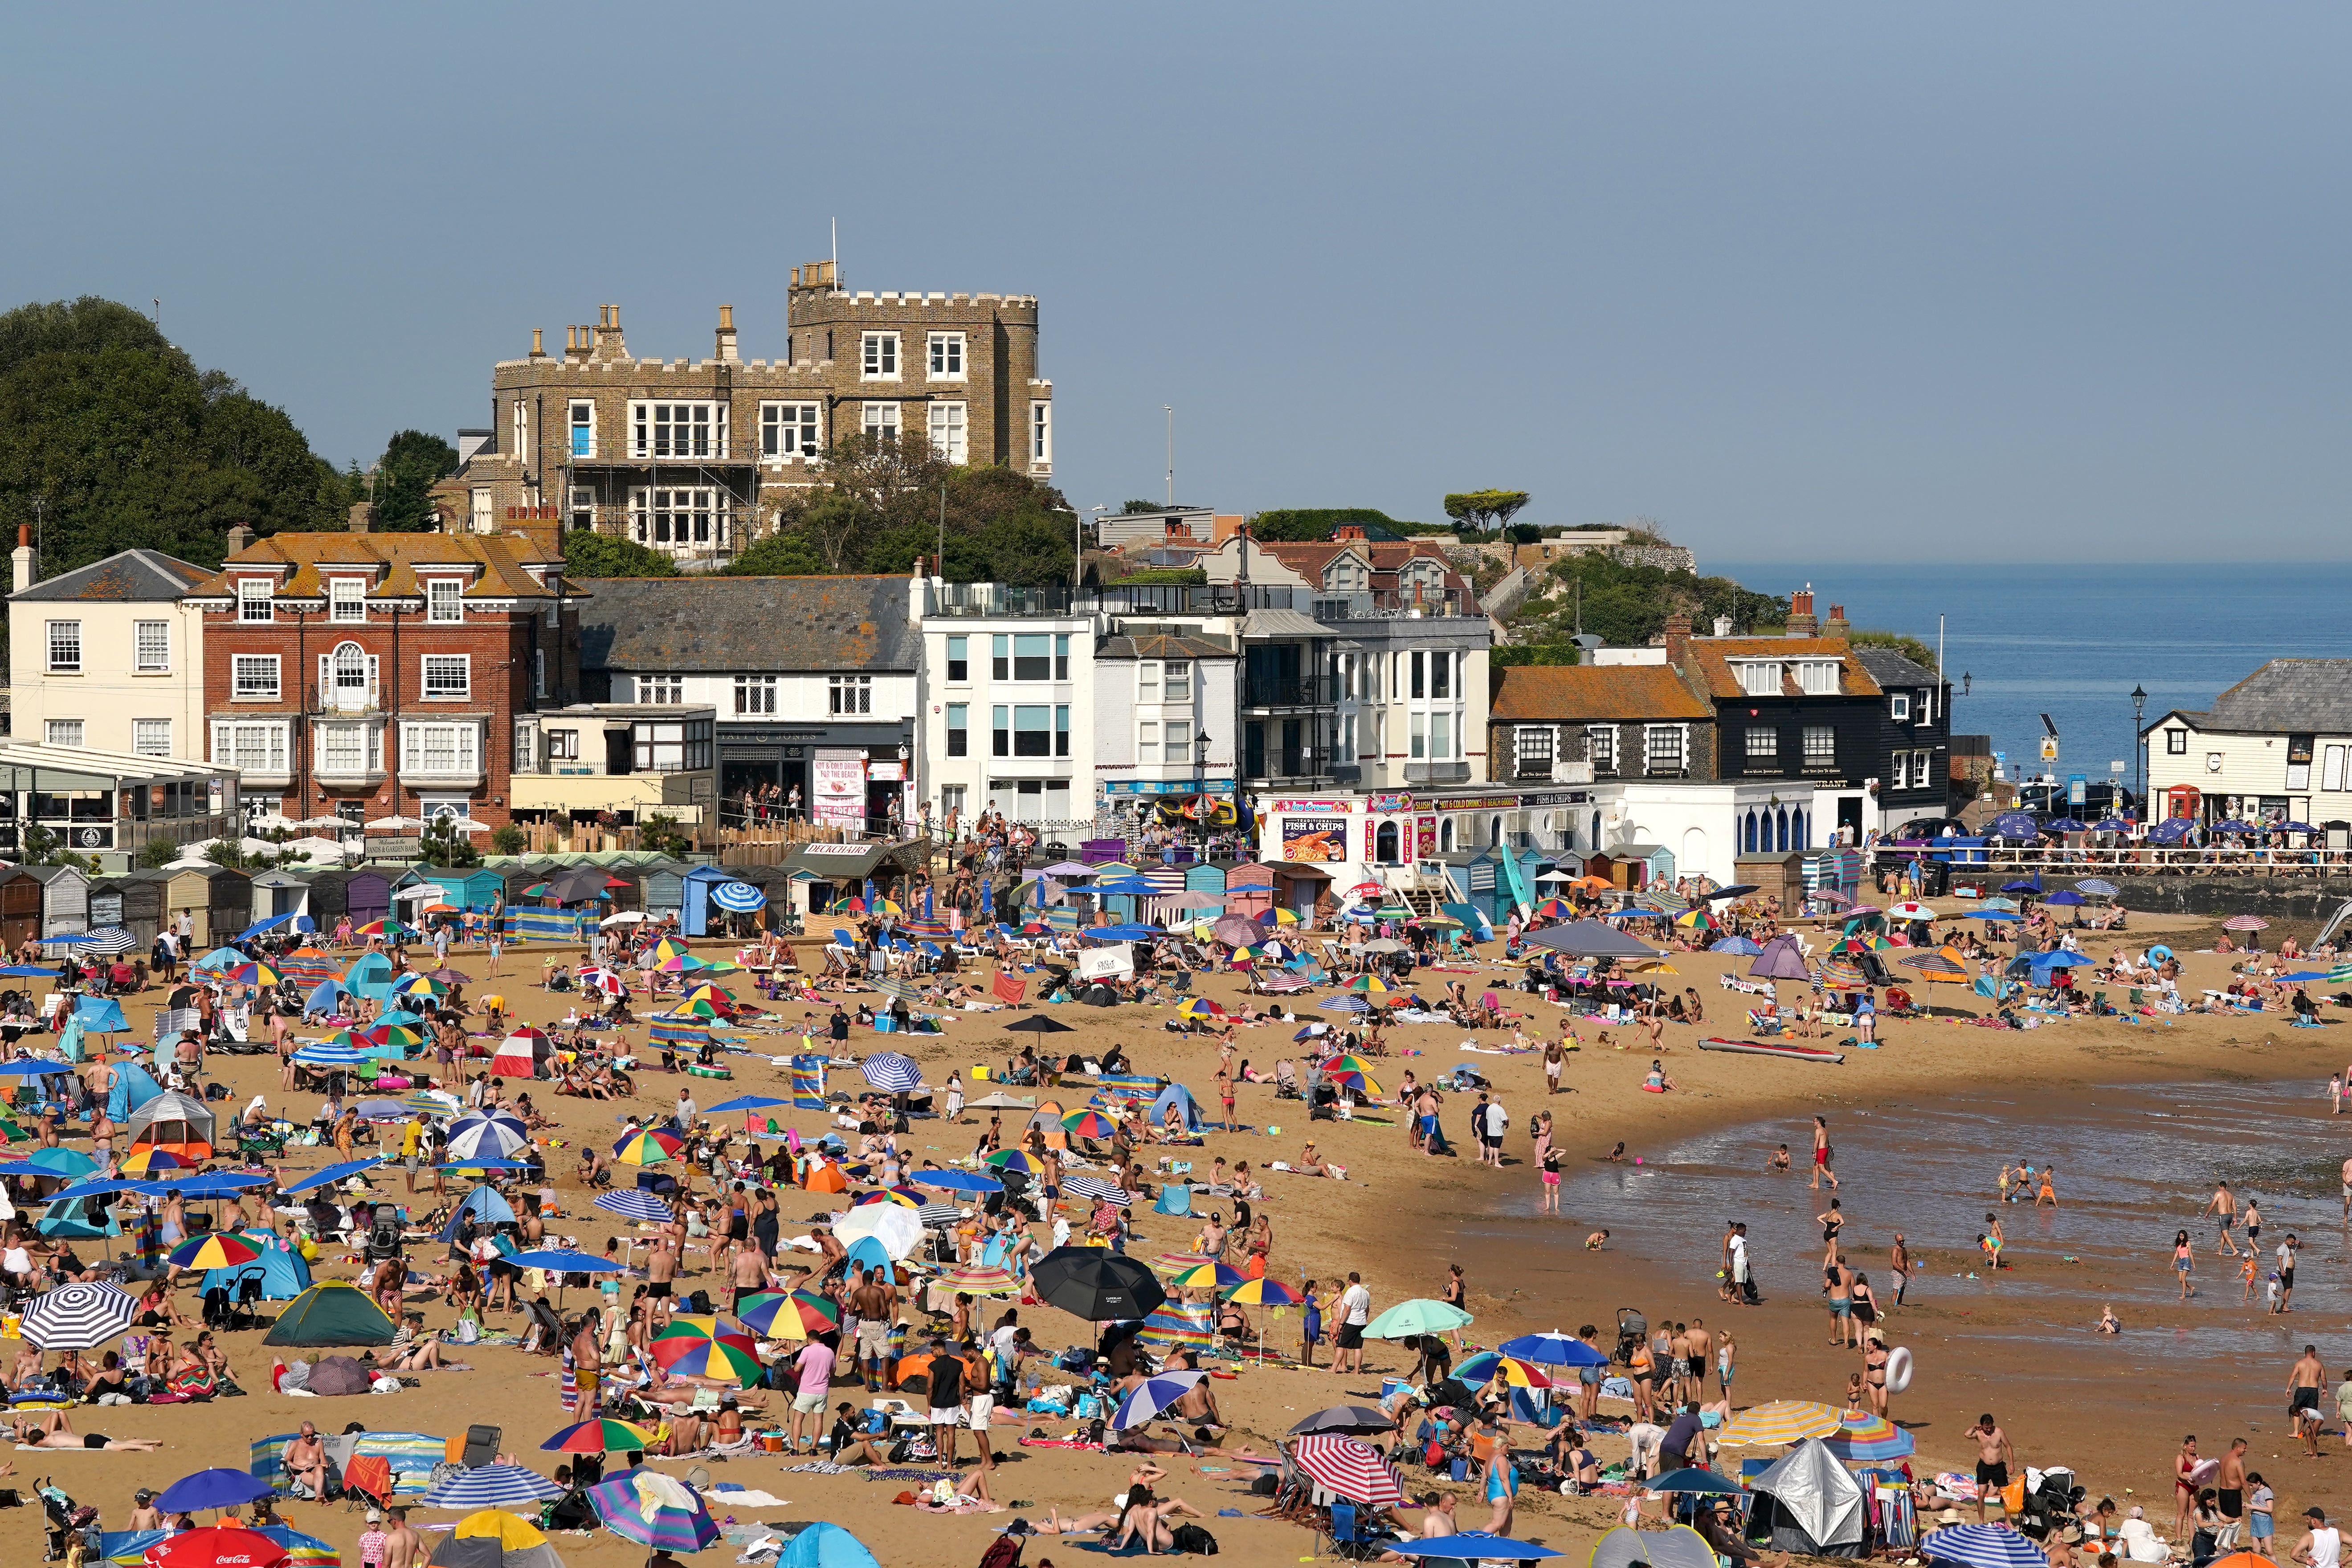 Temperatures are expected to reach a high of 30C next week, particularly in the South East